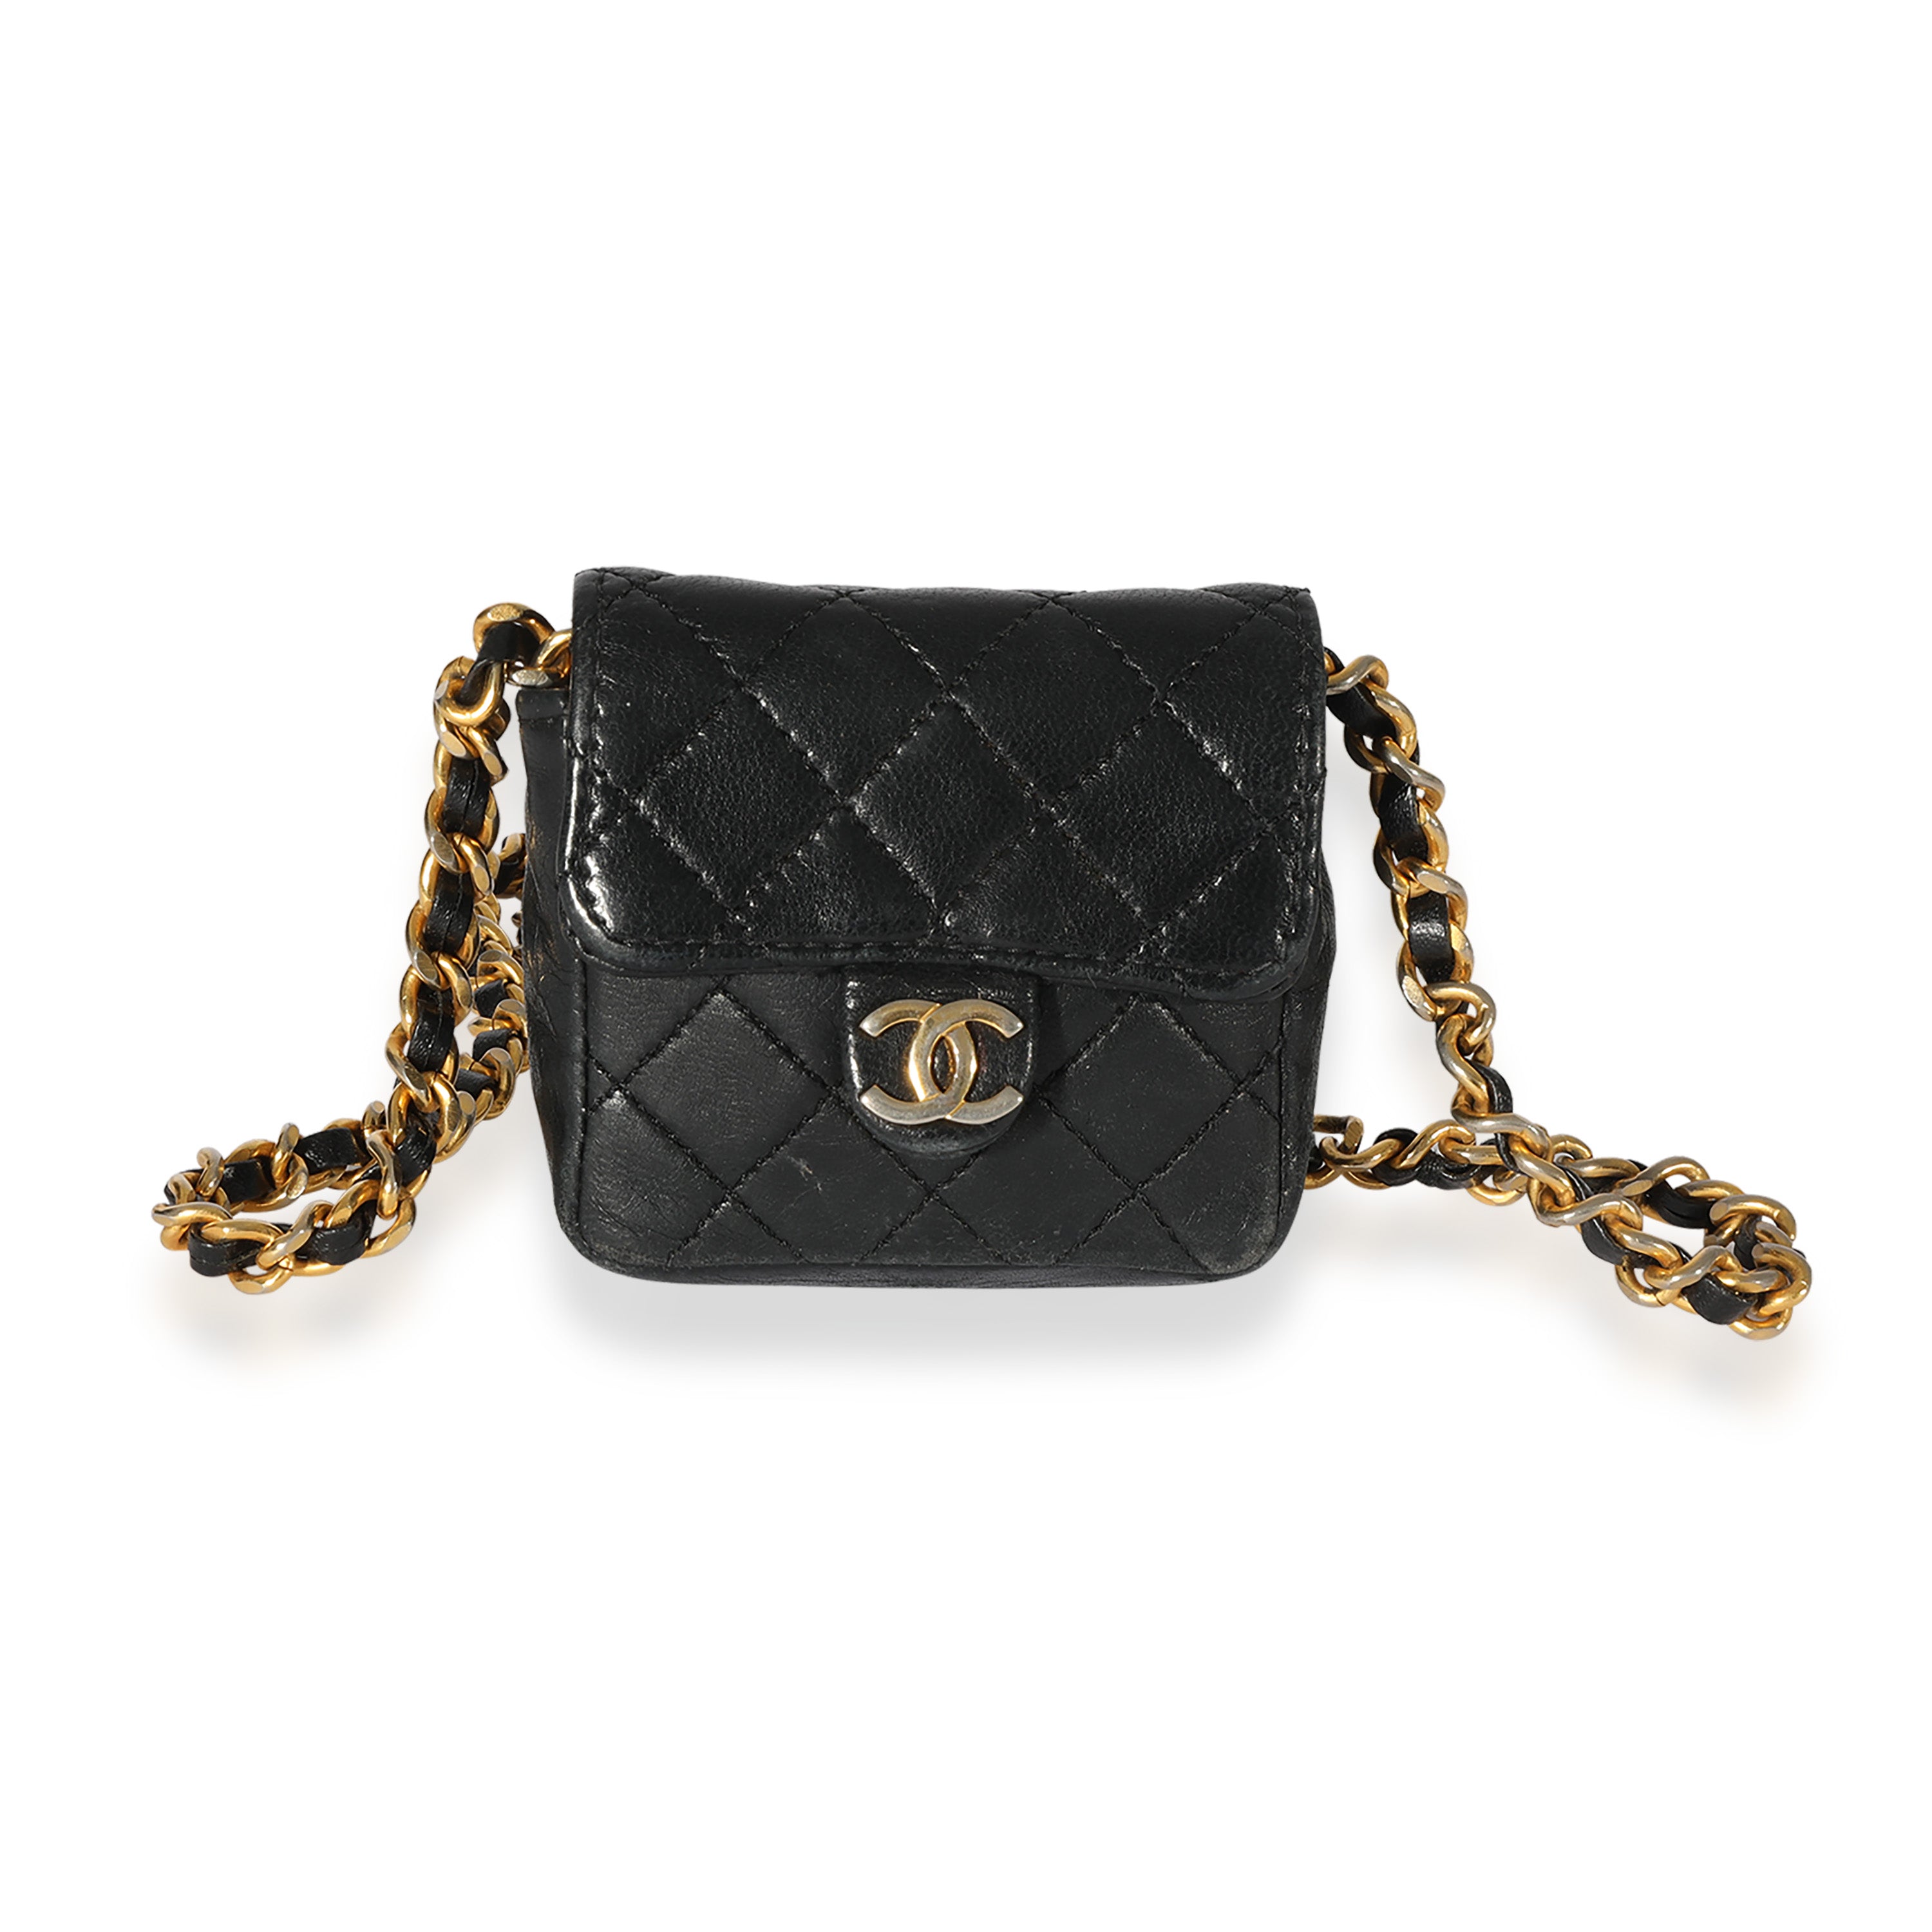 Chanel Vintage Black Quilted Lambskin Micro Flap Bag, myGemma, HK